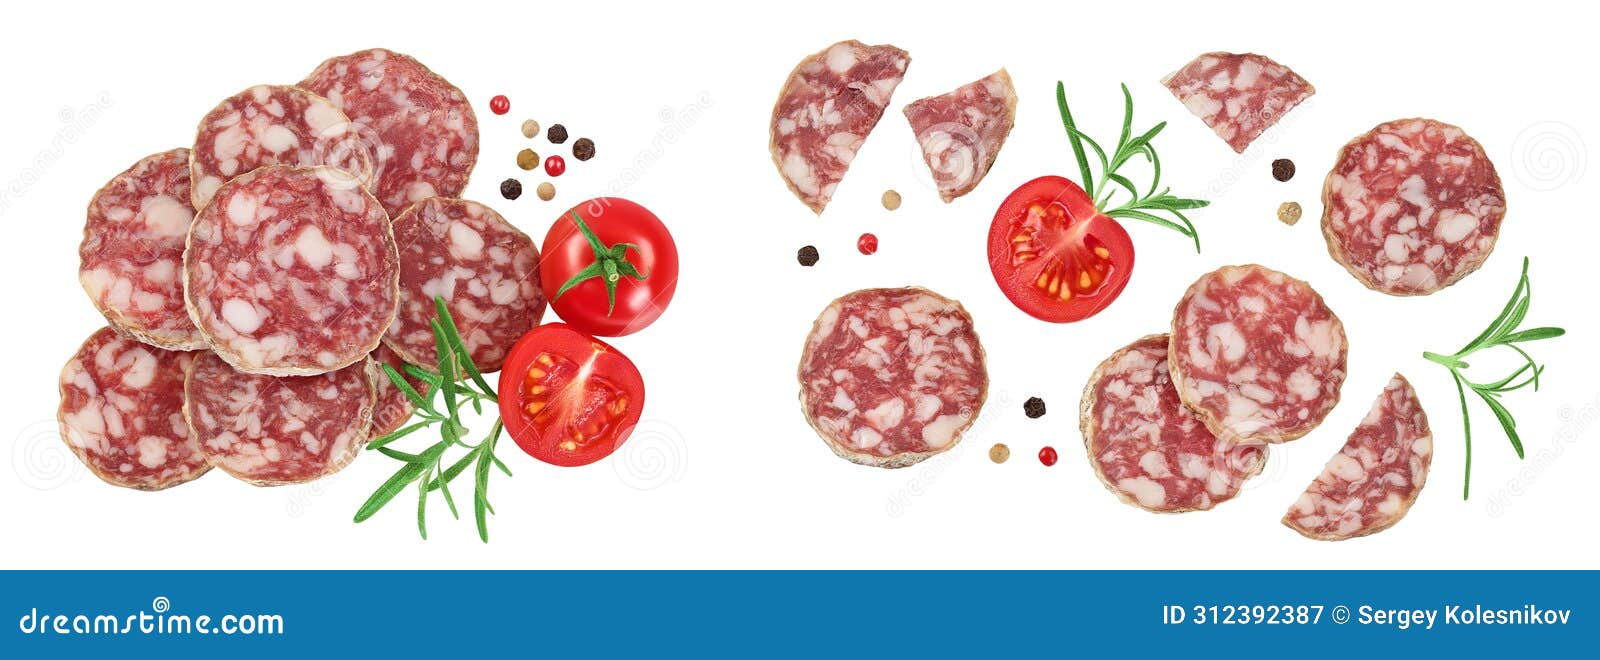 cured salami sausage slices  on white background. italian cuisine with full depth of field. top view. flat lay.